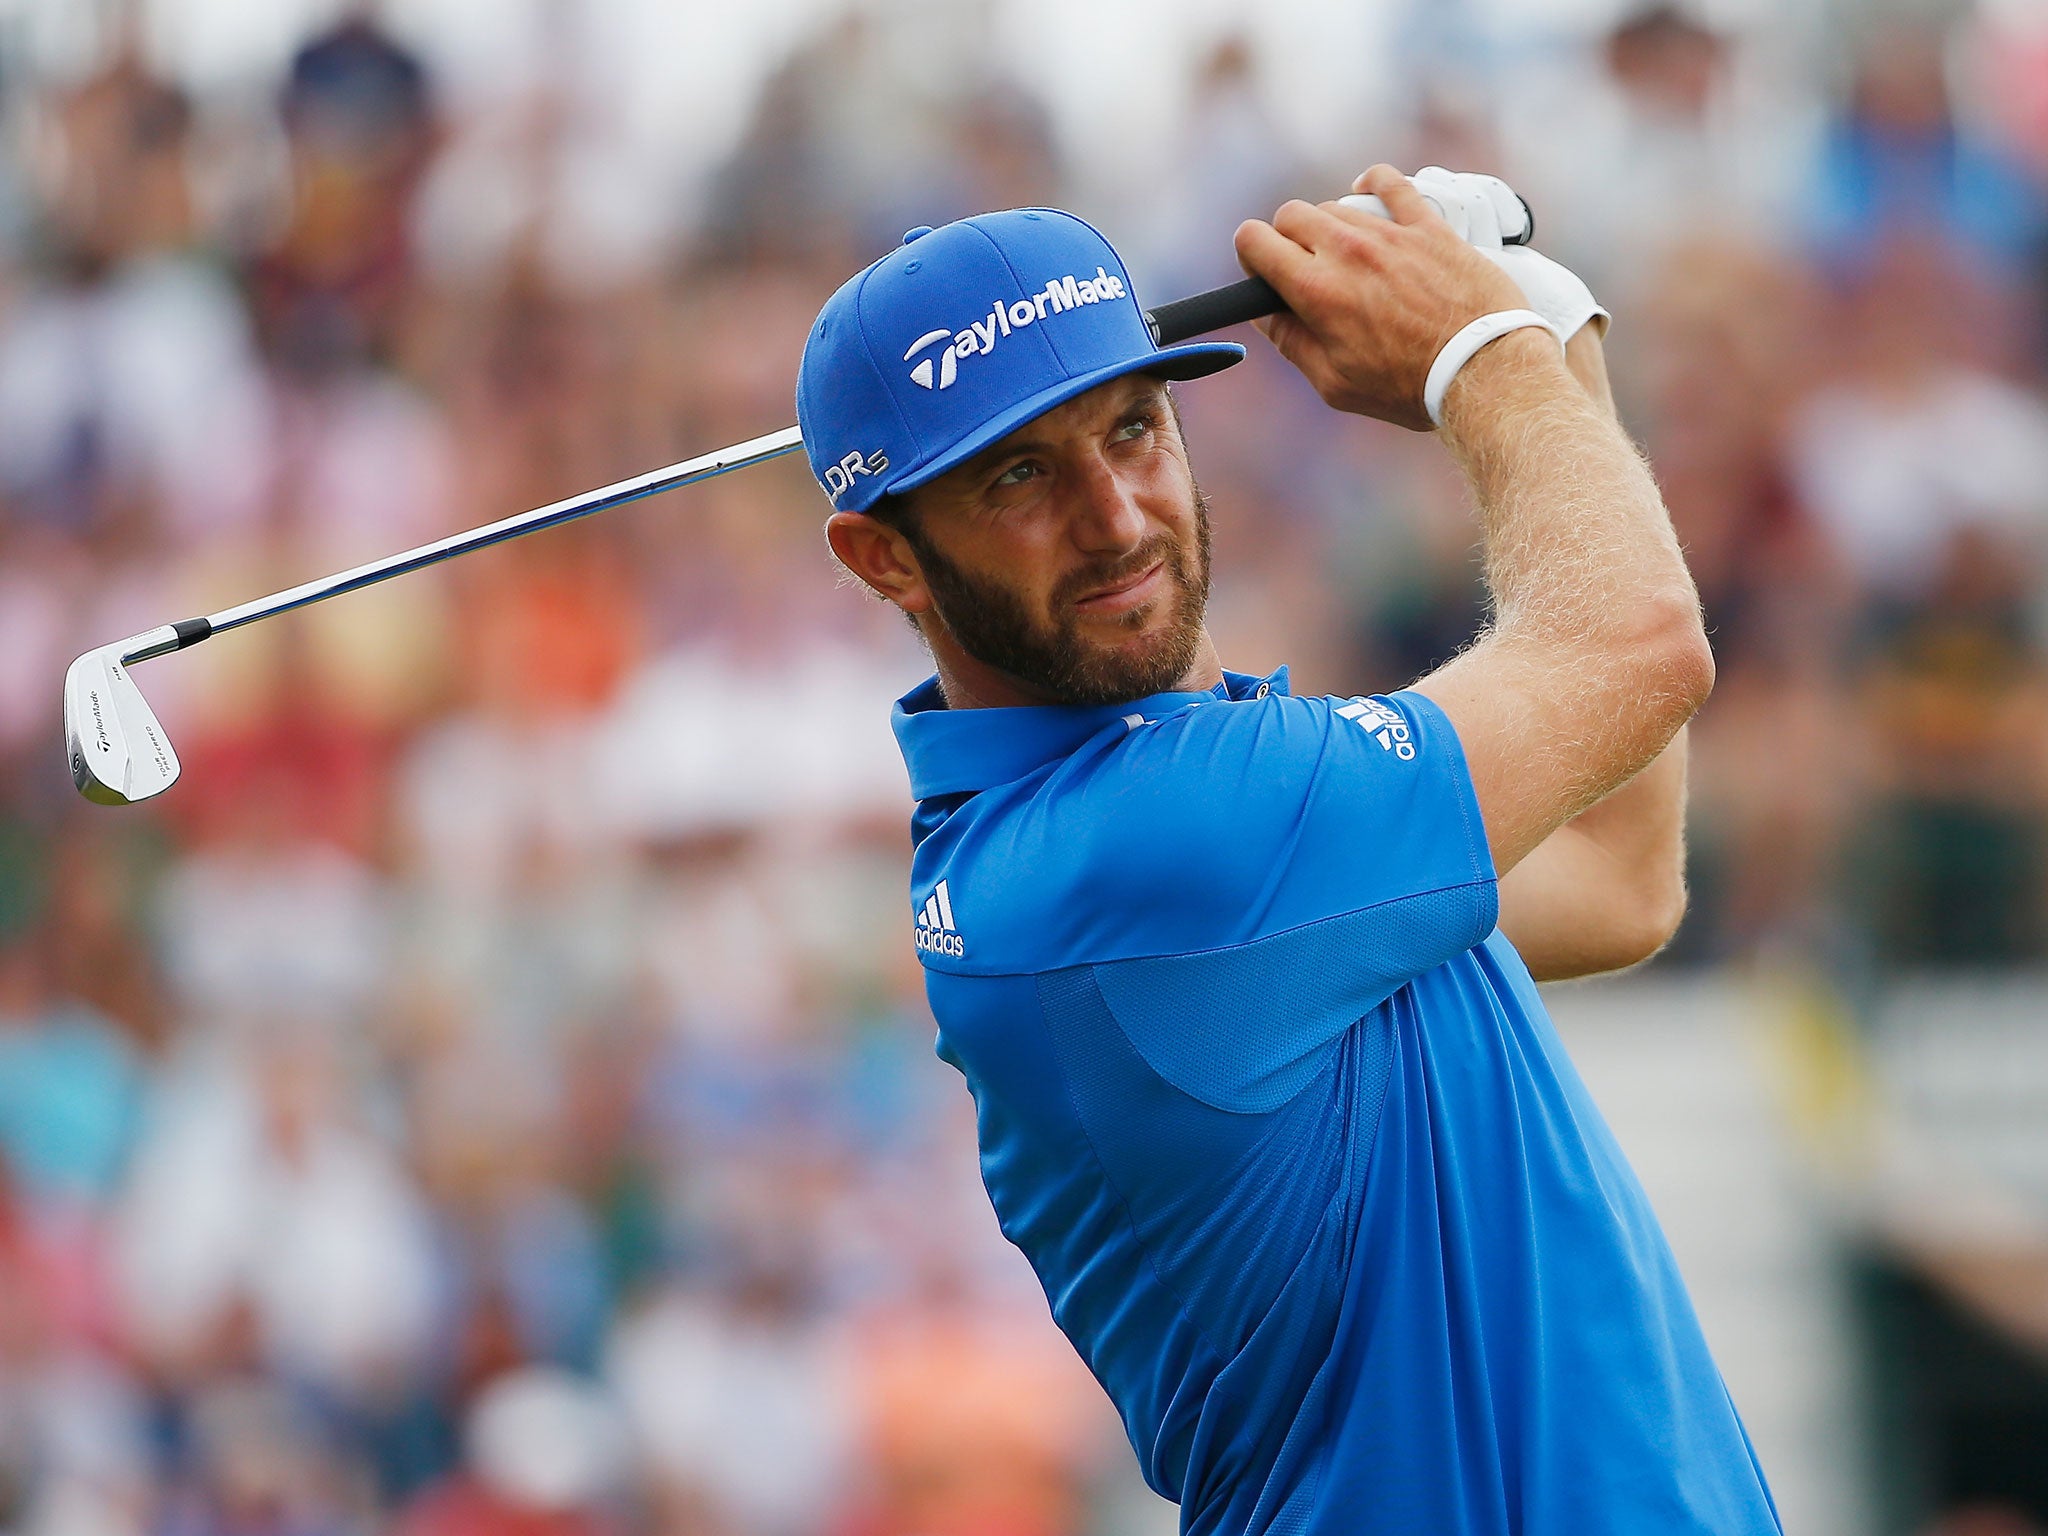 Dustin Johnson in action during the Open Championship